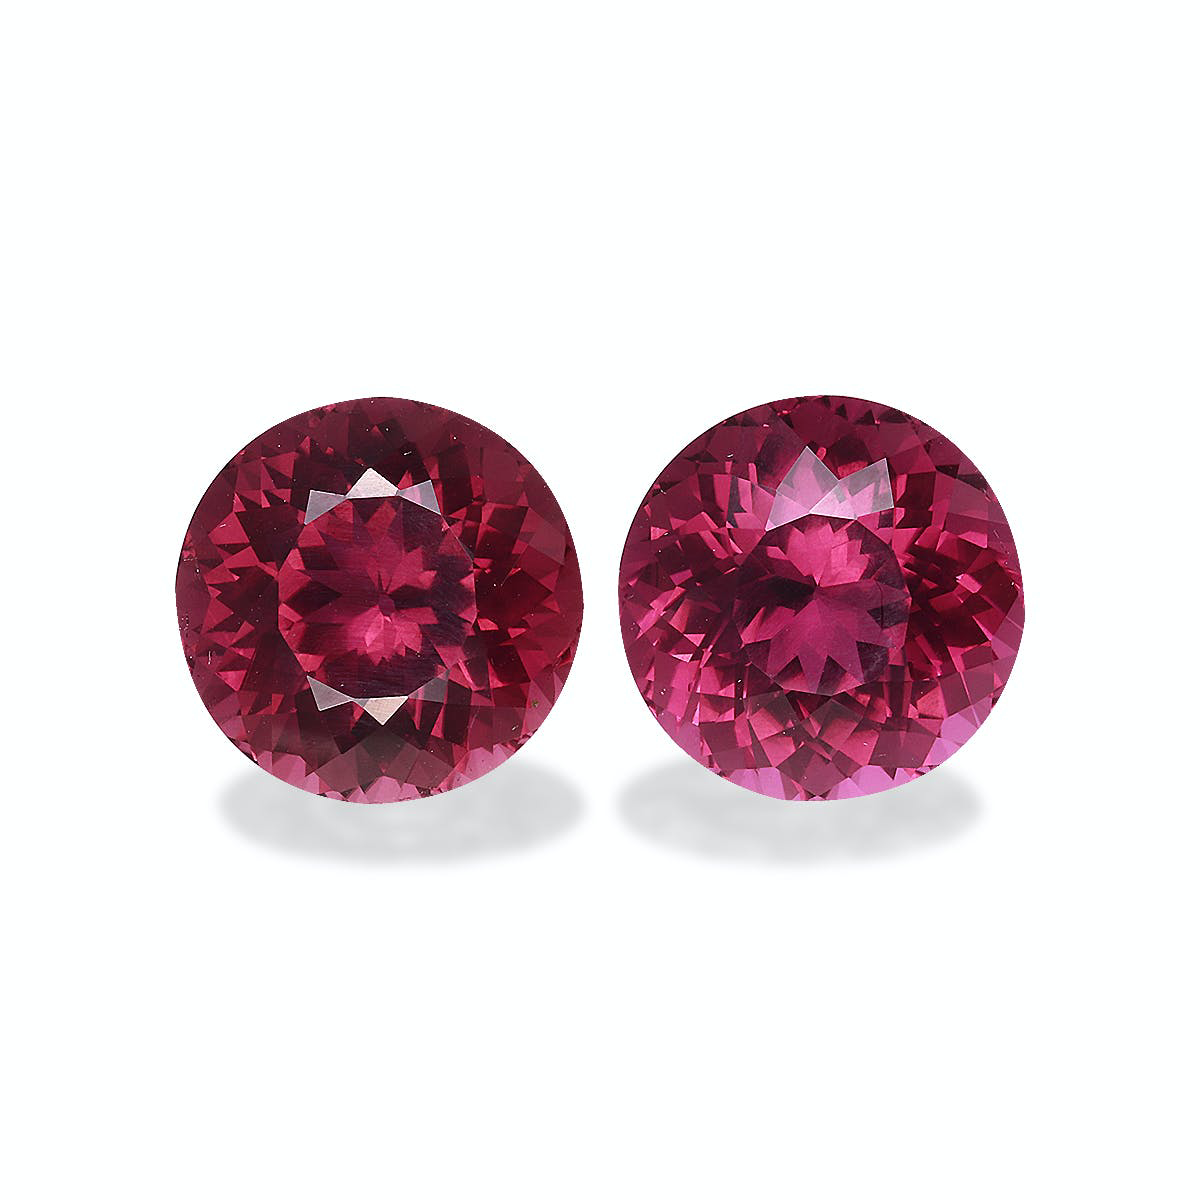 Picture of Pink Tourmaline 21.49ct - 13mm Pair (PT0544)